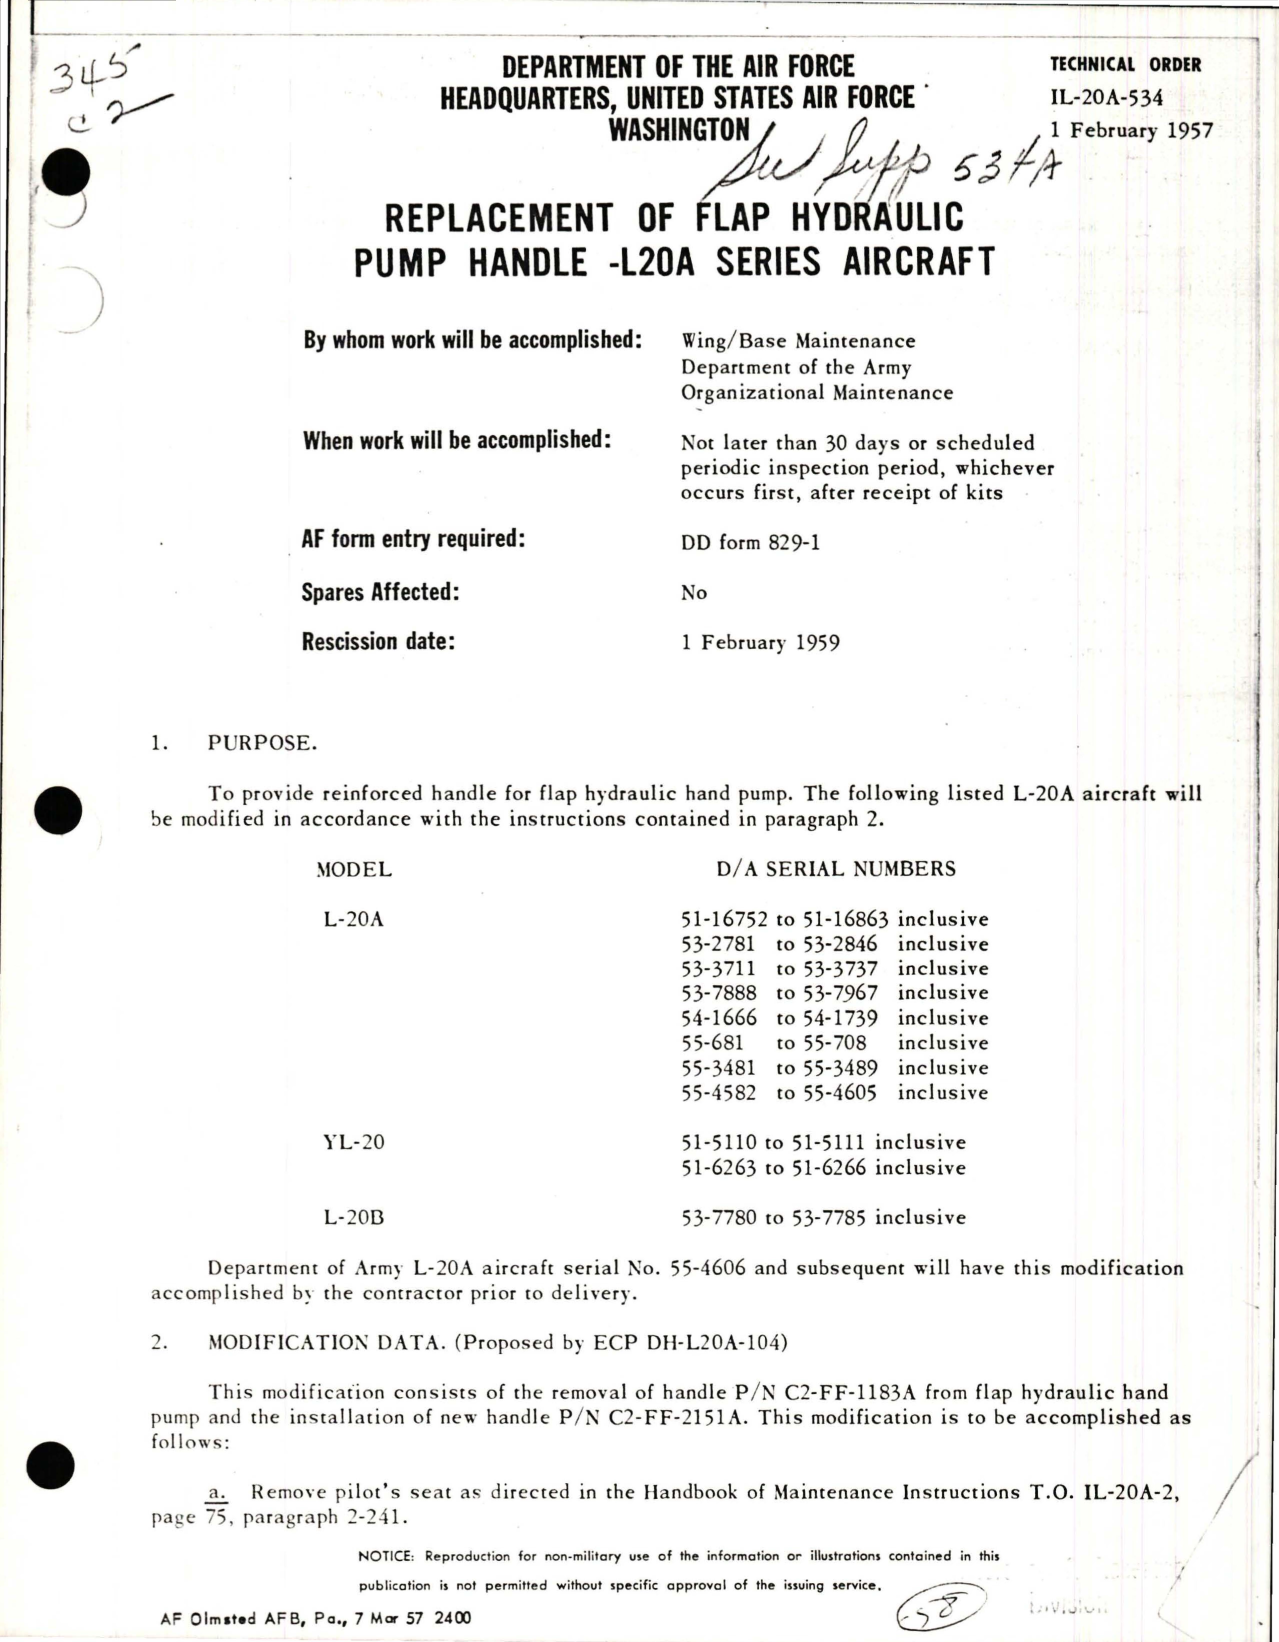 Sample page 1 from AirCorps Library document: Replacement of Flap Hydraulic Pump Handle - L-20A Series